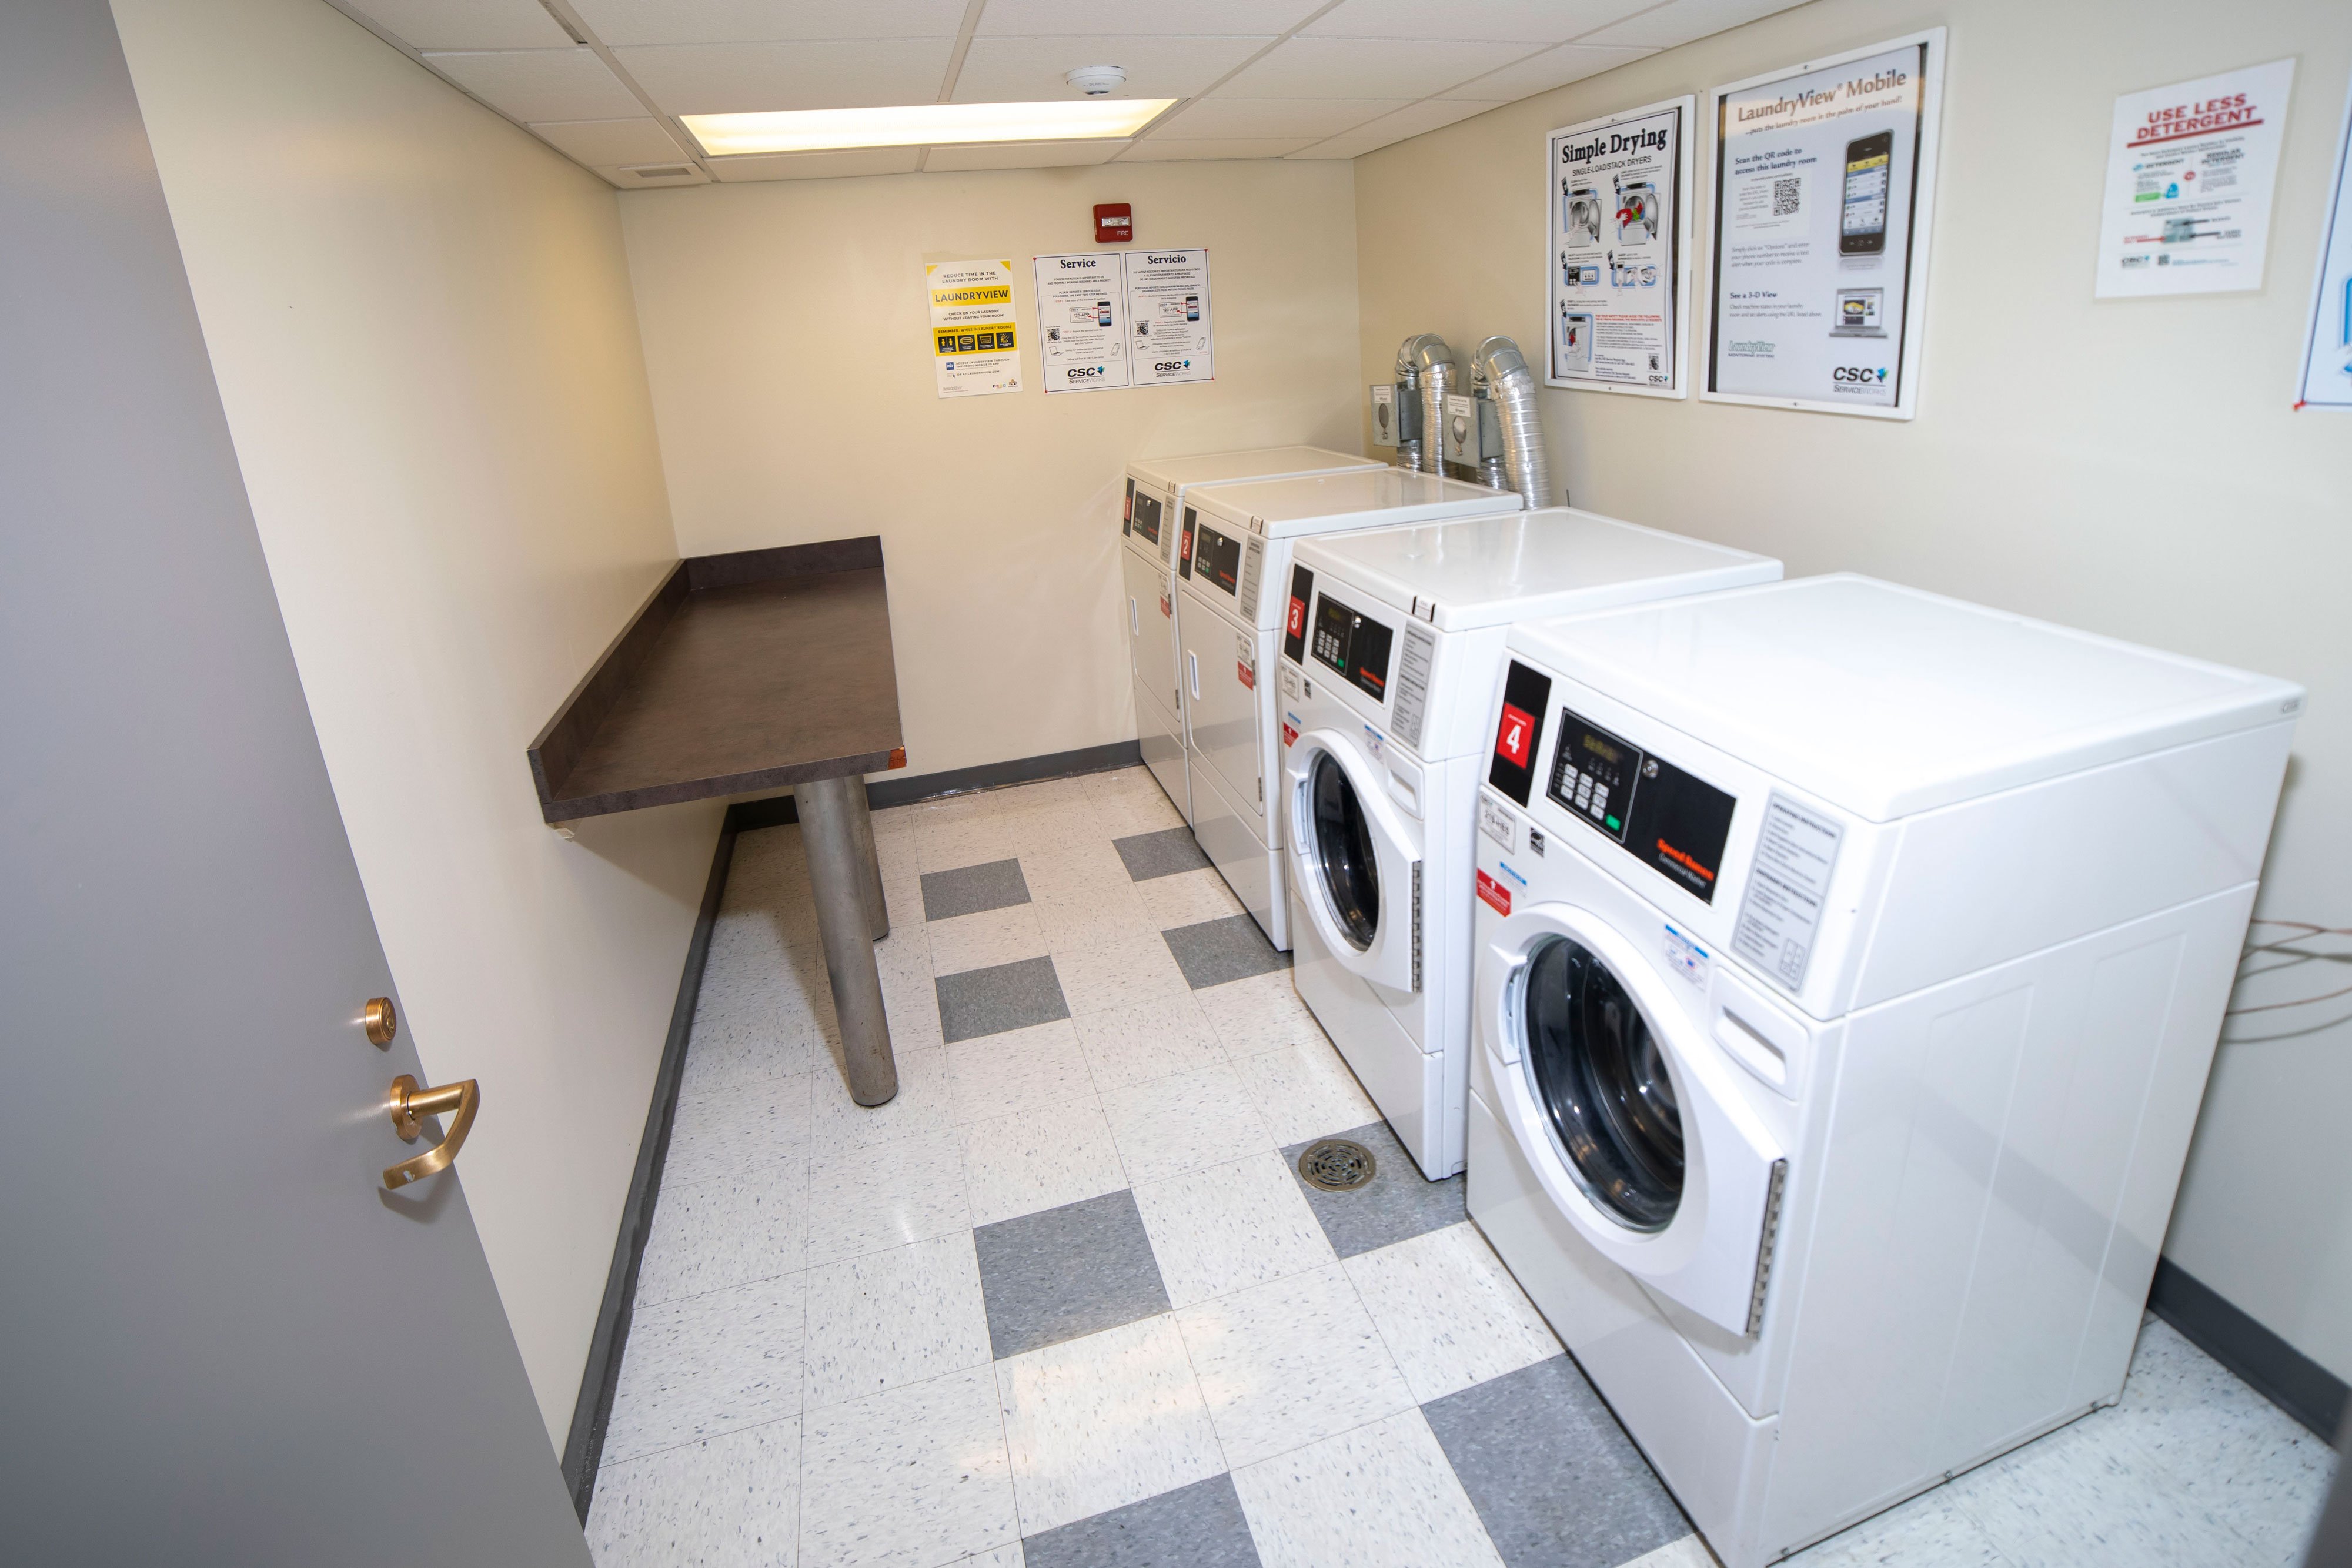 A laundry room with two washing machines, two dryers and a counter top.